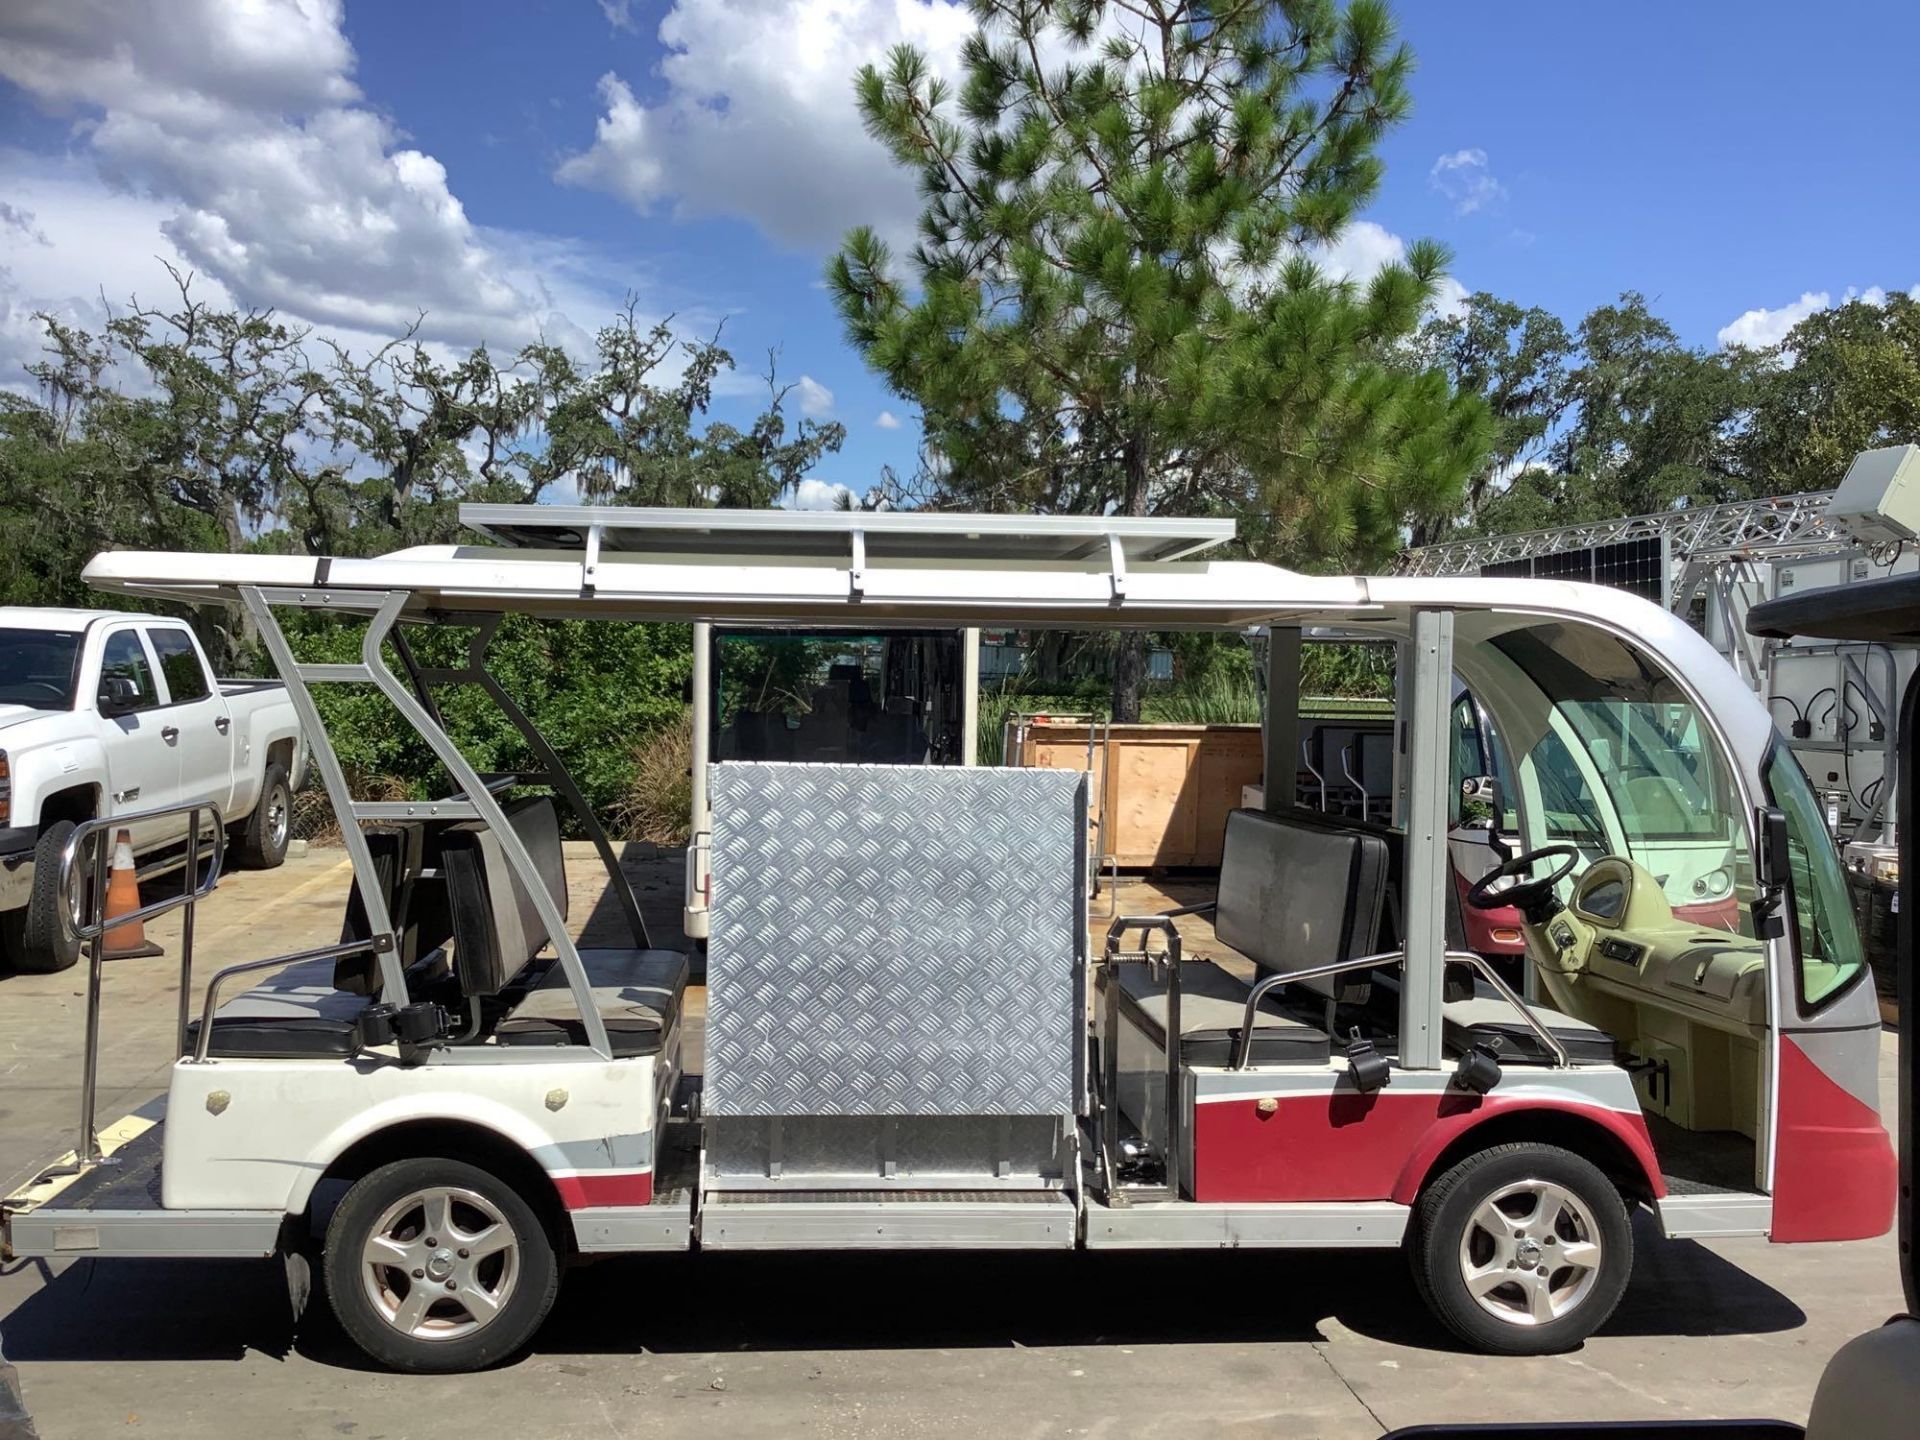 2015 STAR EV SHUTTLE CART MODEL STAR-BN72-11-AC-WHEELCHAIR, ELECTRIC, SOLA PANEL ATTACHED, DOME LIGH - Image 9 of 40